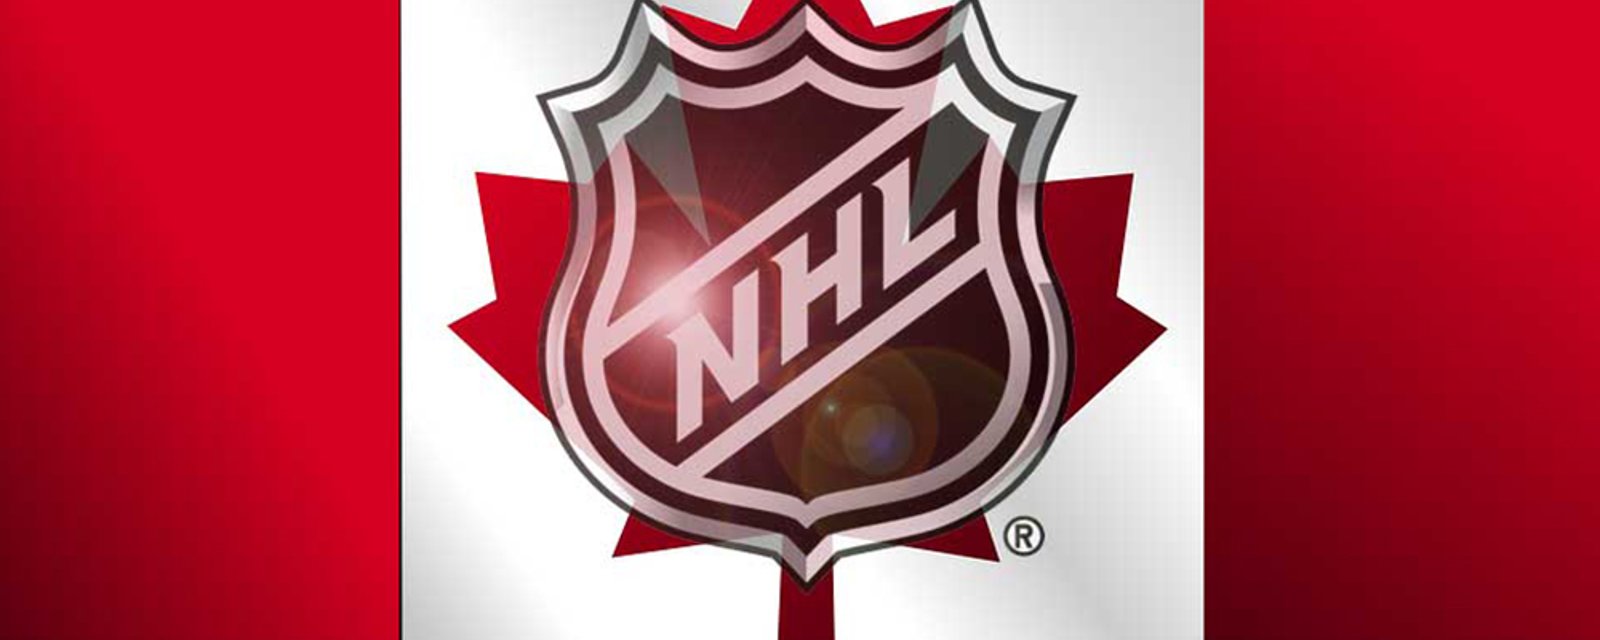 Report: 2021 schedule gets approval from provinces in all 7 Canadian NHL cities